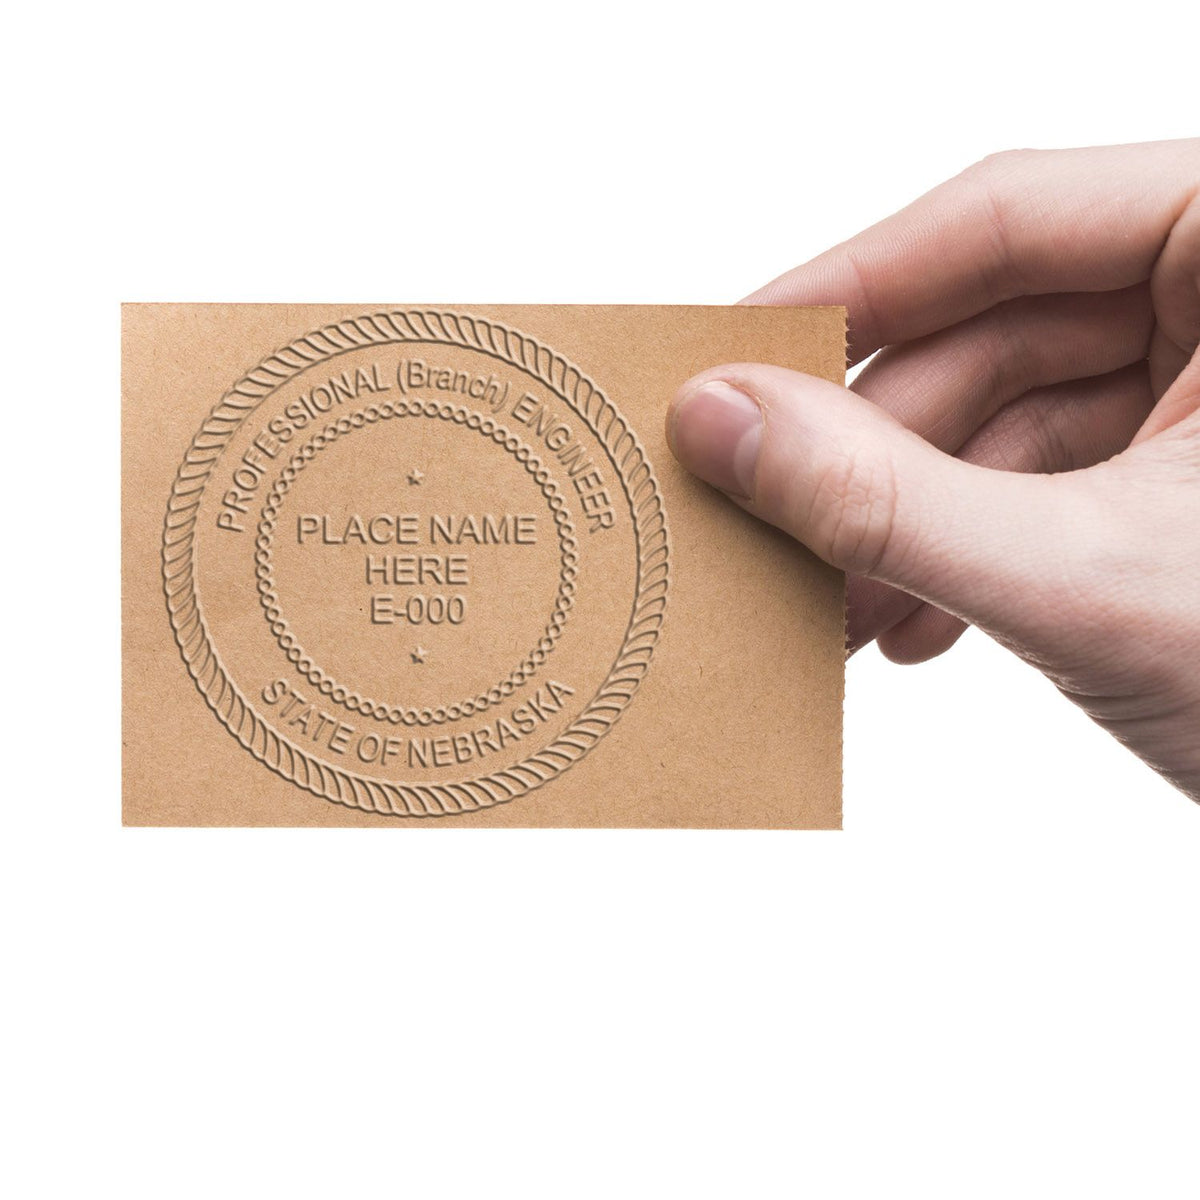 An alternative view of the Heavy Duty Cast Iron Nebraska Engineer Seal Embosser stamped on a sheet of paper showing the image in use